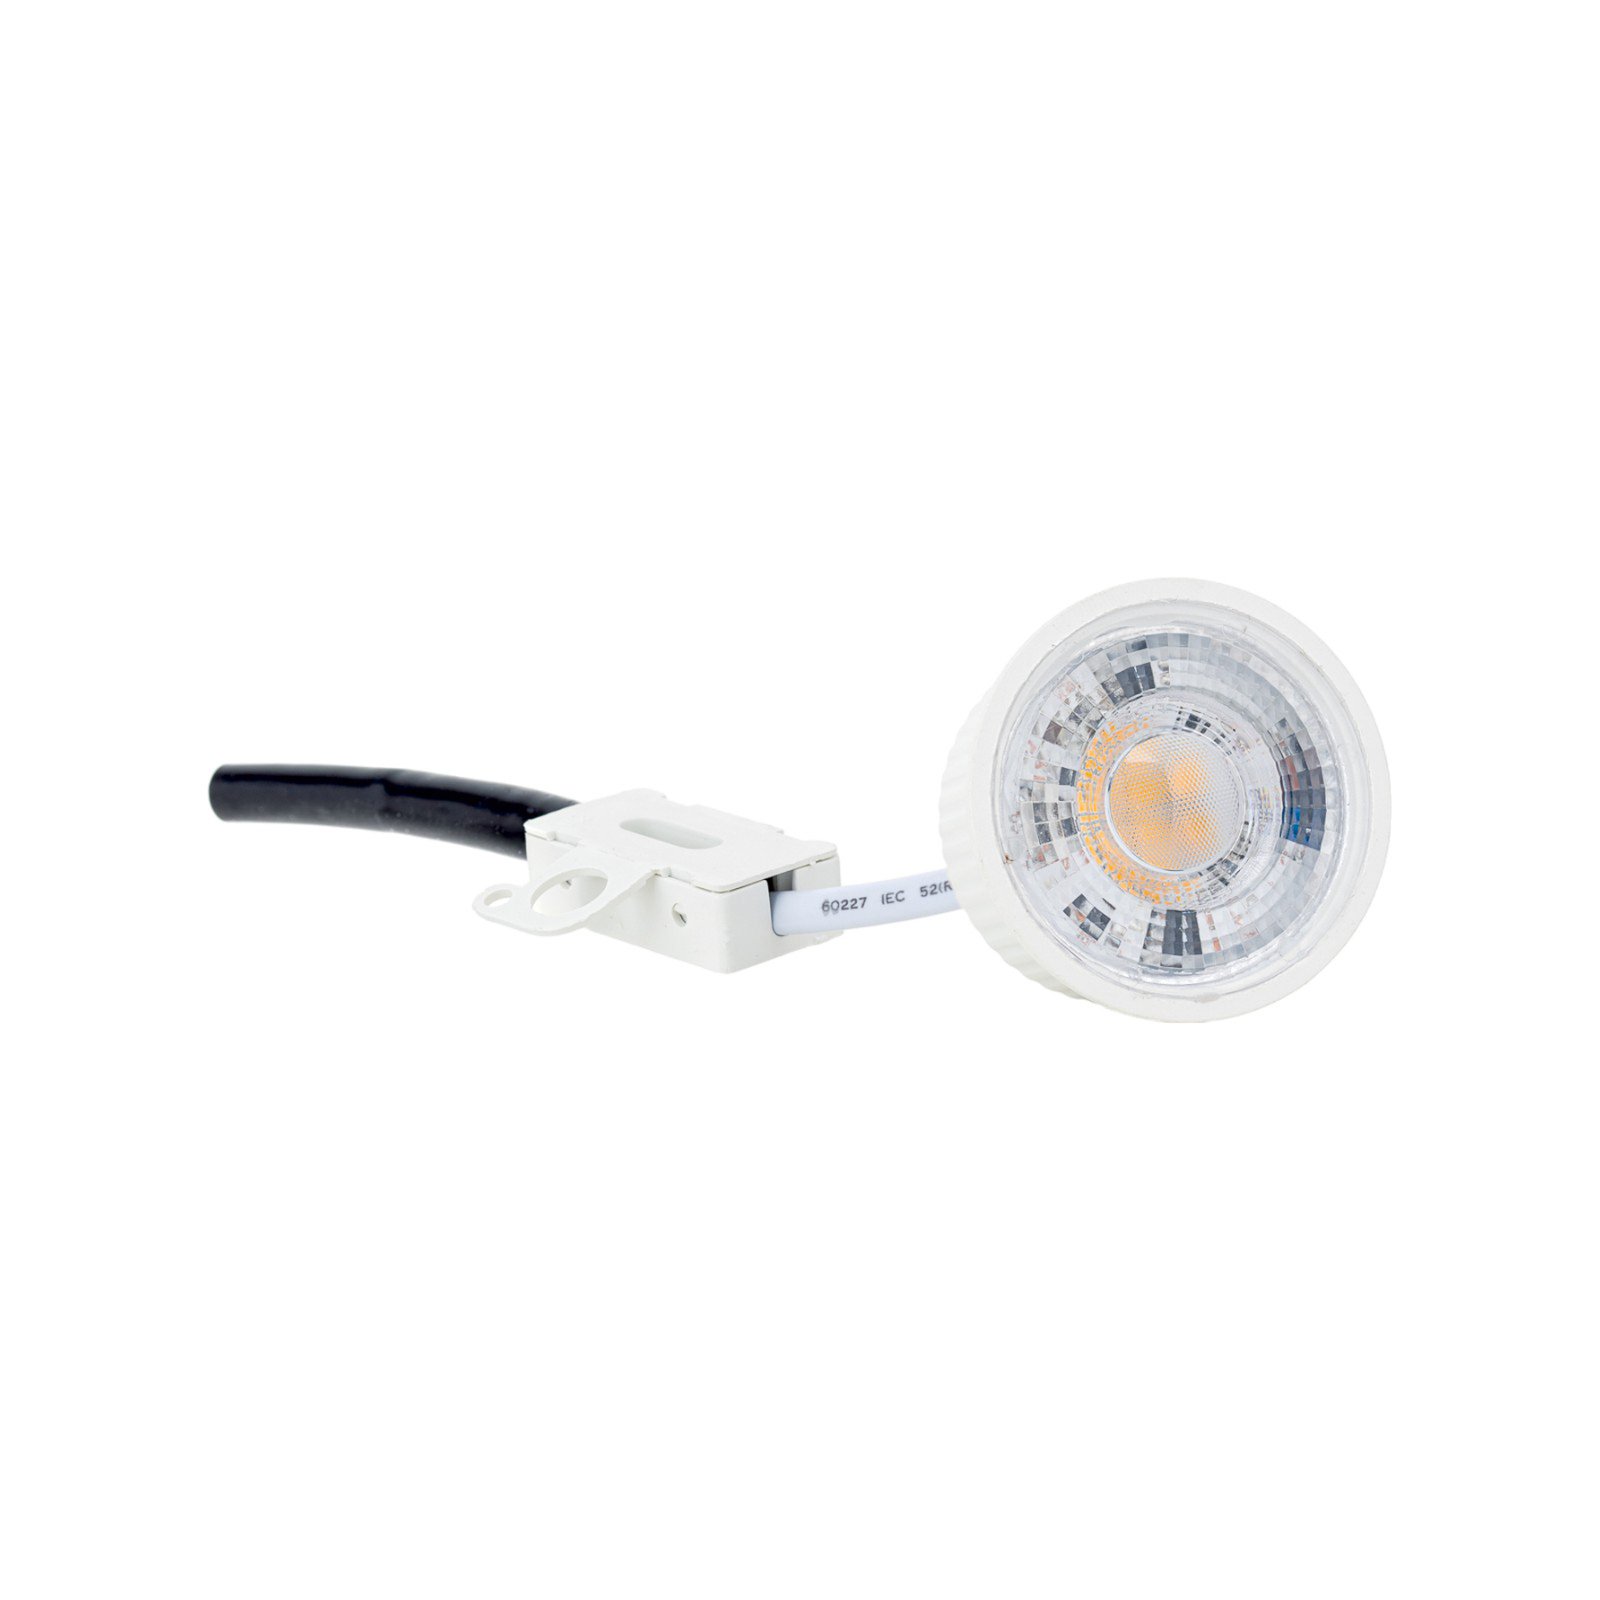 LED module, GU10 recessed, 4.9 W, 3,000 K, 410 lm, dimmable